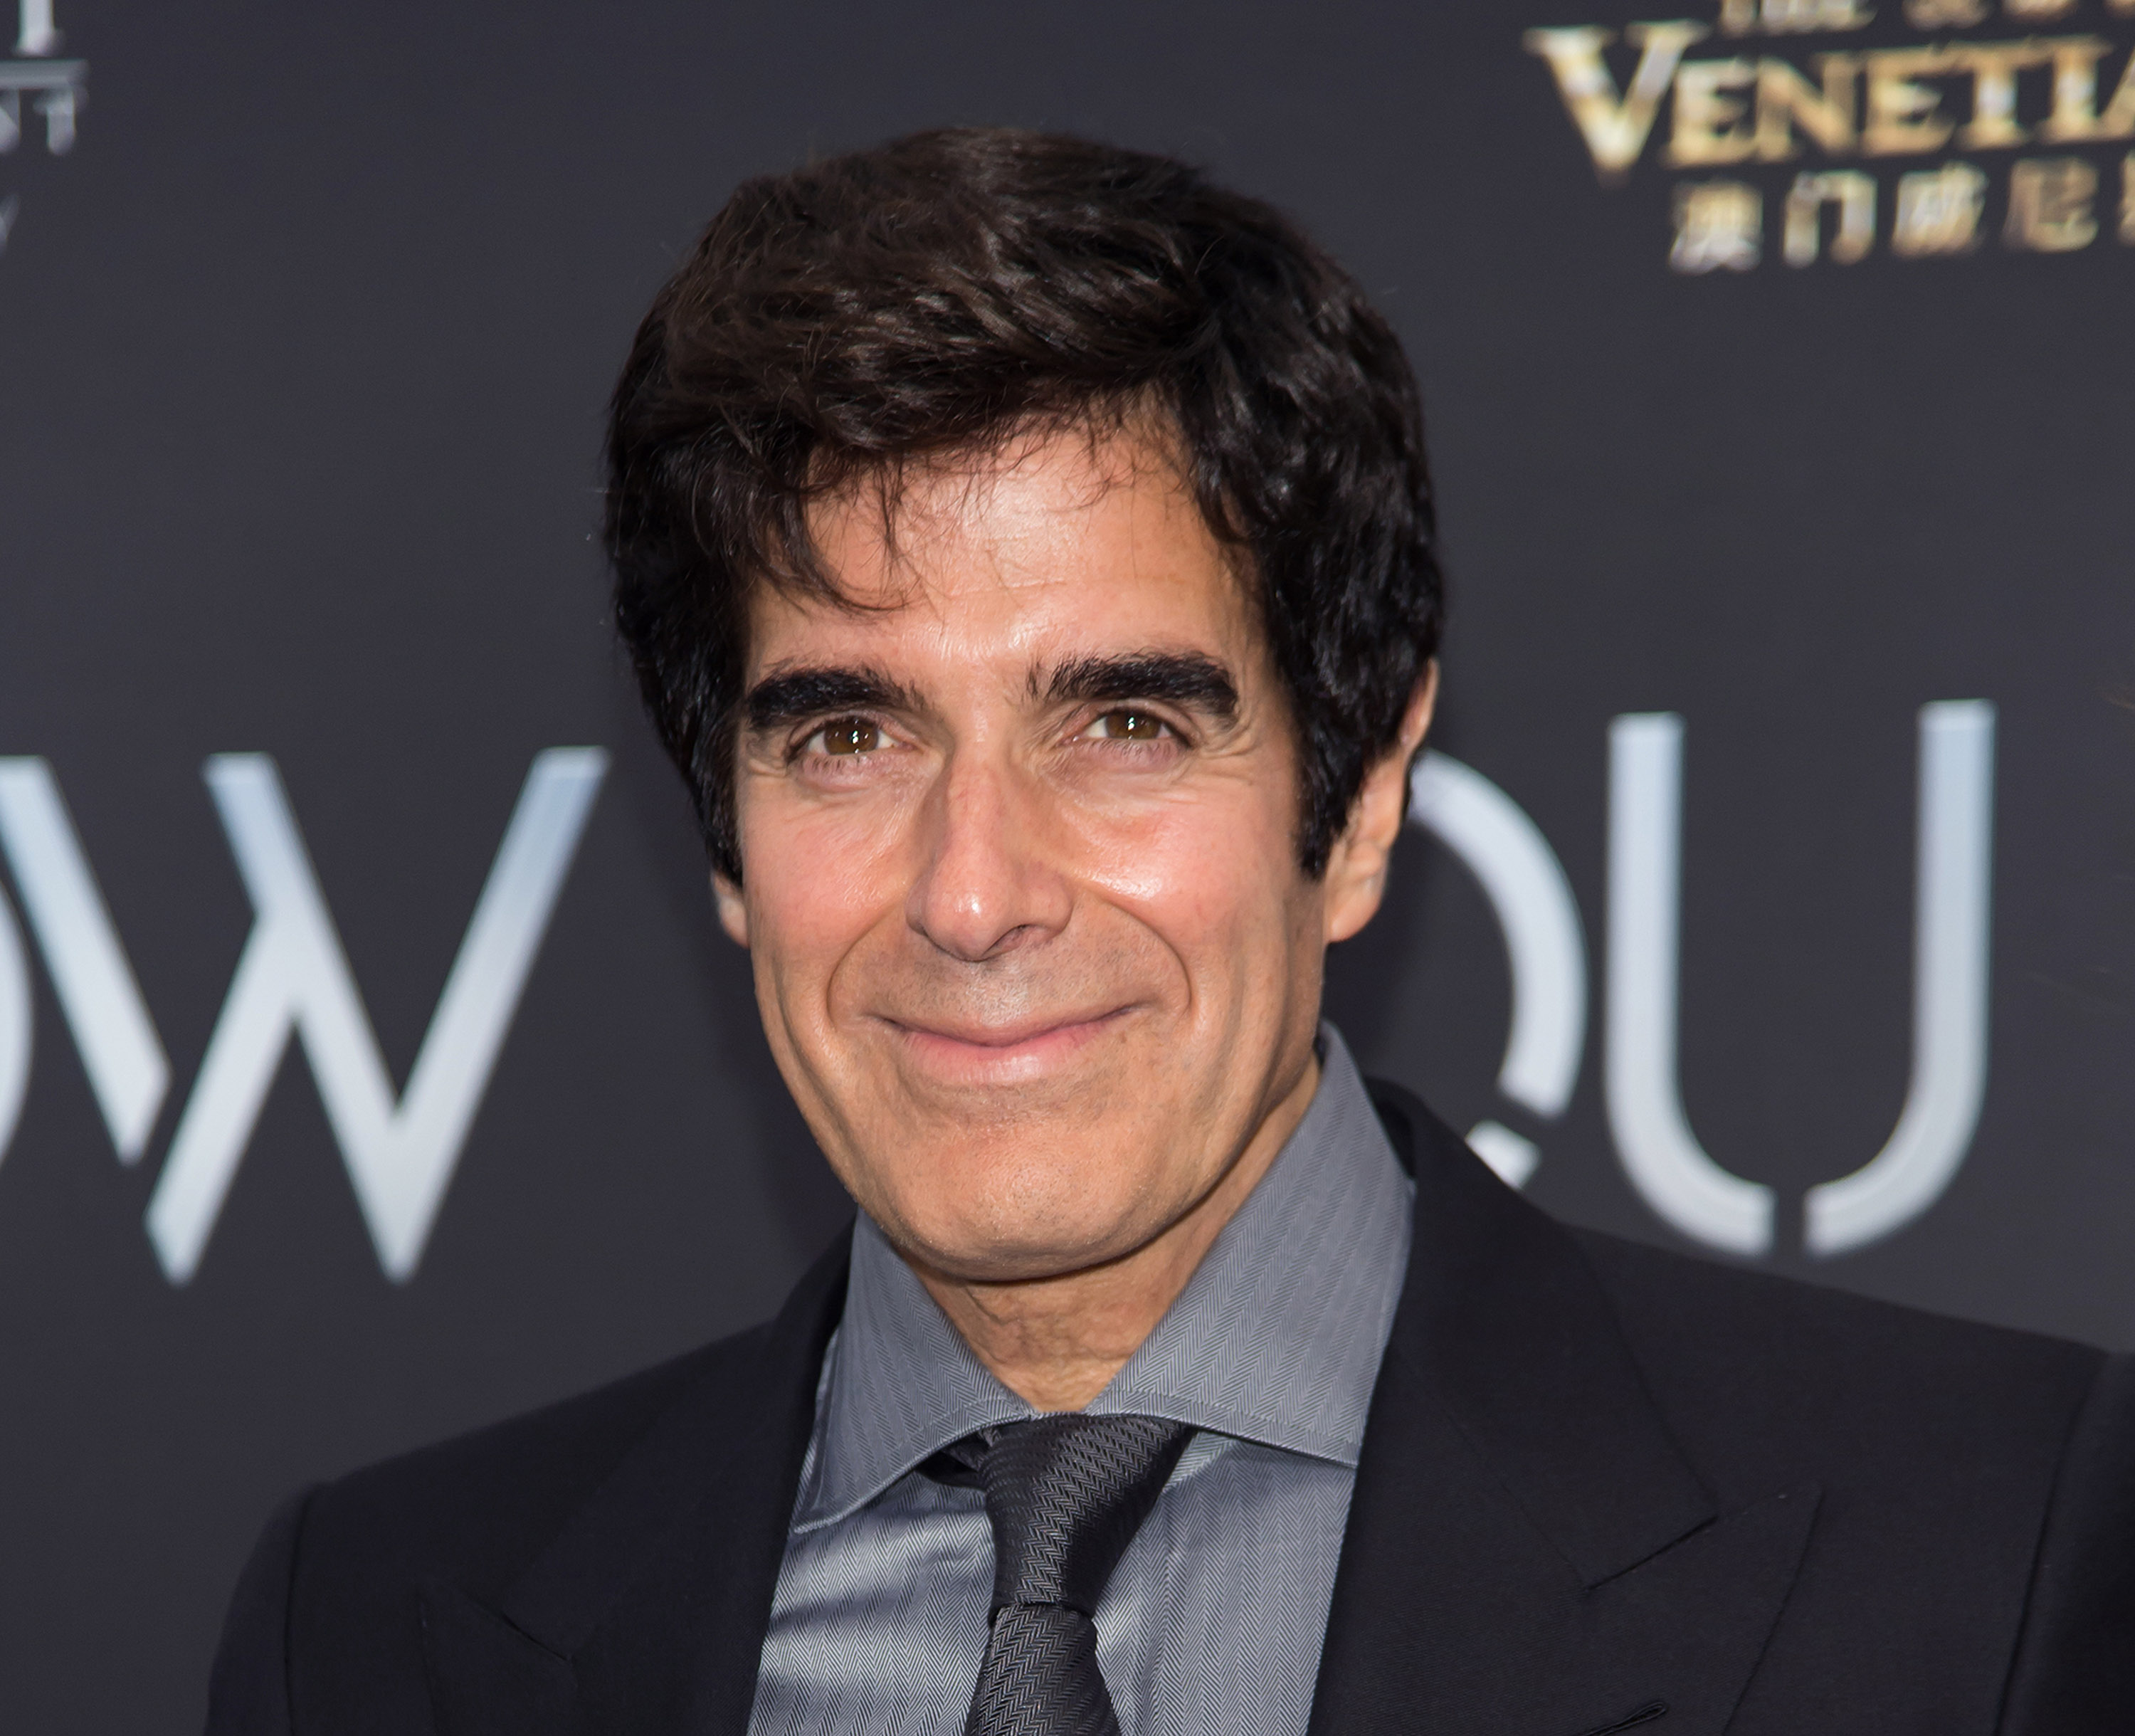 Illusionist David Copperfield attends 'Now You See Me 2' World Premiere at AMC Loews Lincoln Square 13 theater on June 6, 2016 in New York City. (Gilbert Carrasquillo—FilmMagic)